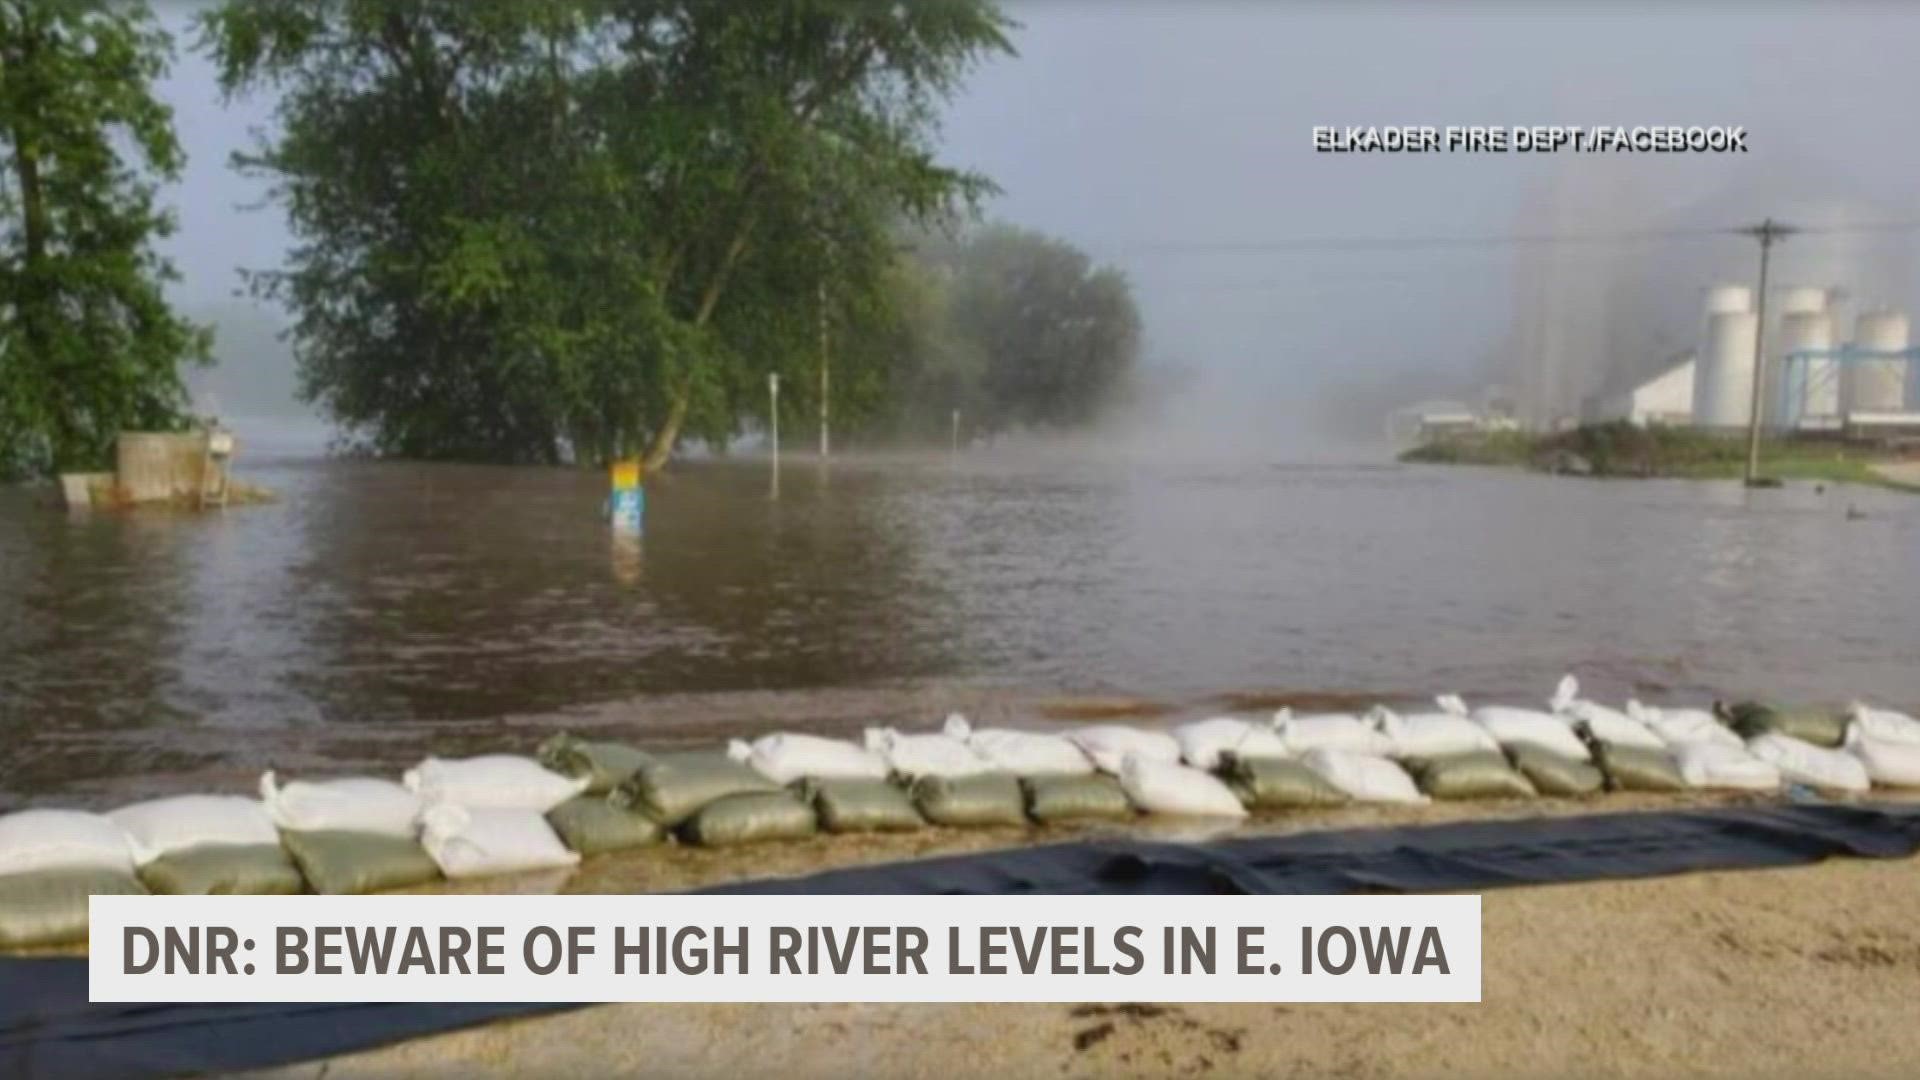 The banks of rivers in eastern Iowa nearly flooded this week, which can lead to dangerous situations for those paddling on the surface.